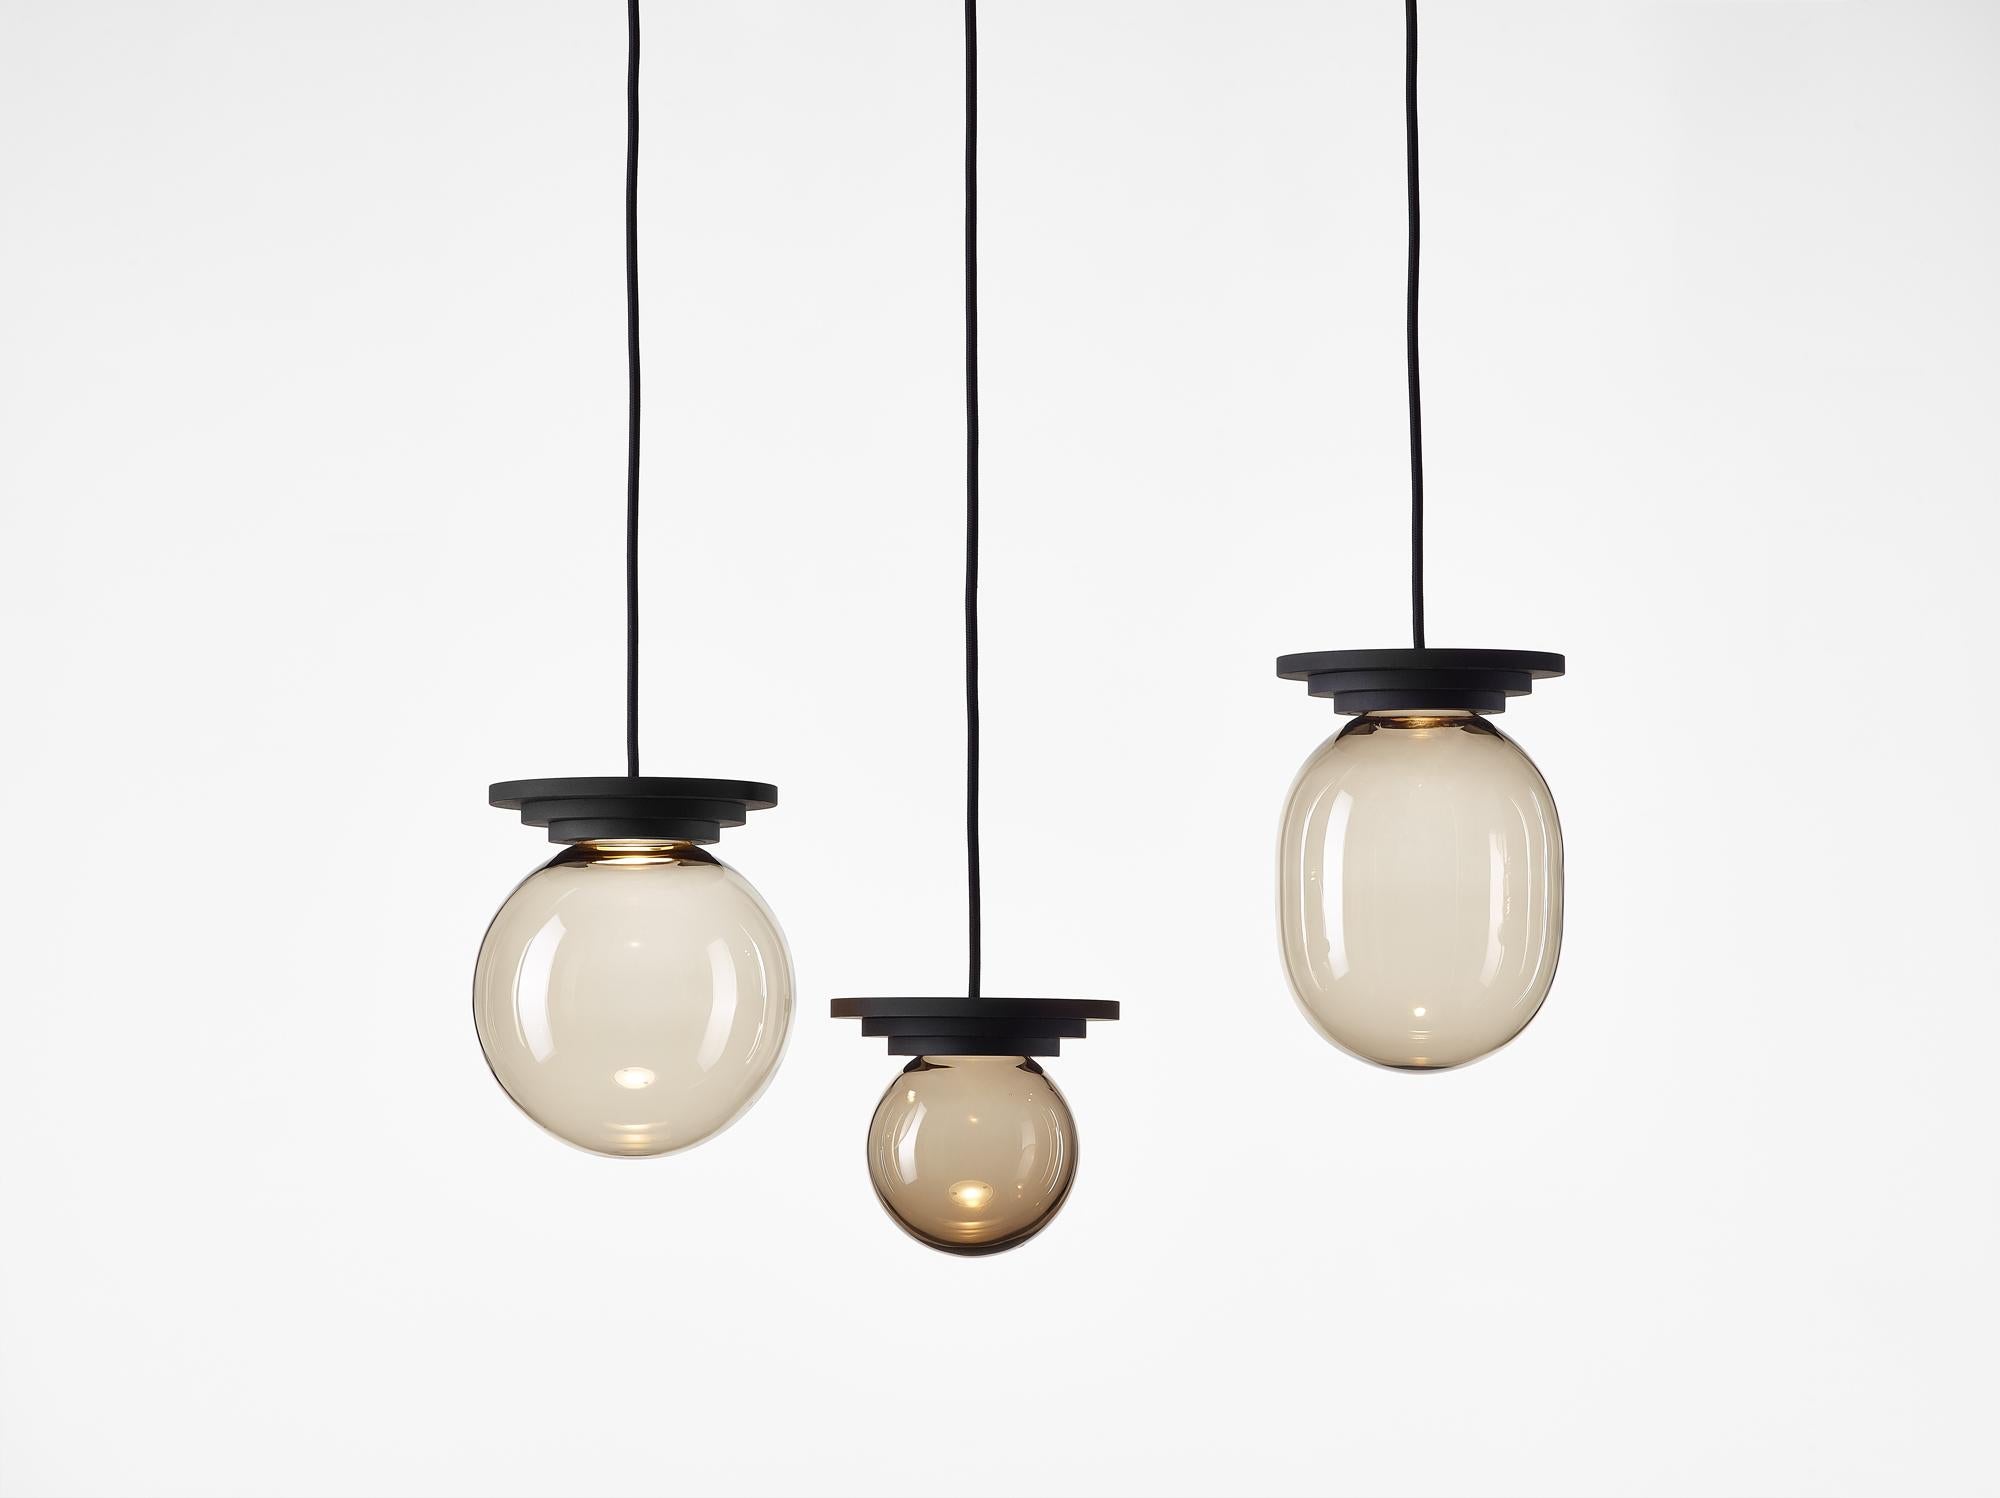 Other Set of 2 Black and Clear Stratos Mini Ball Pendant Light by Dechem Studio For Sale